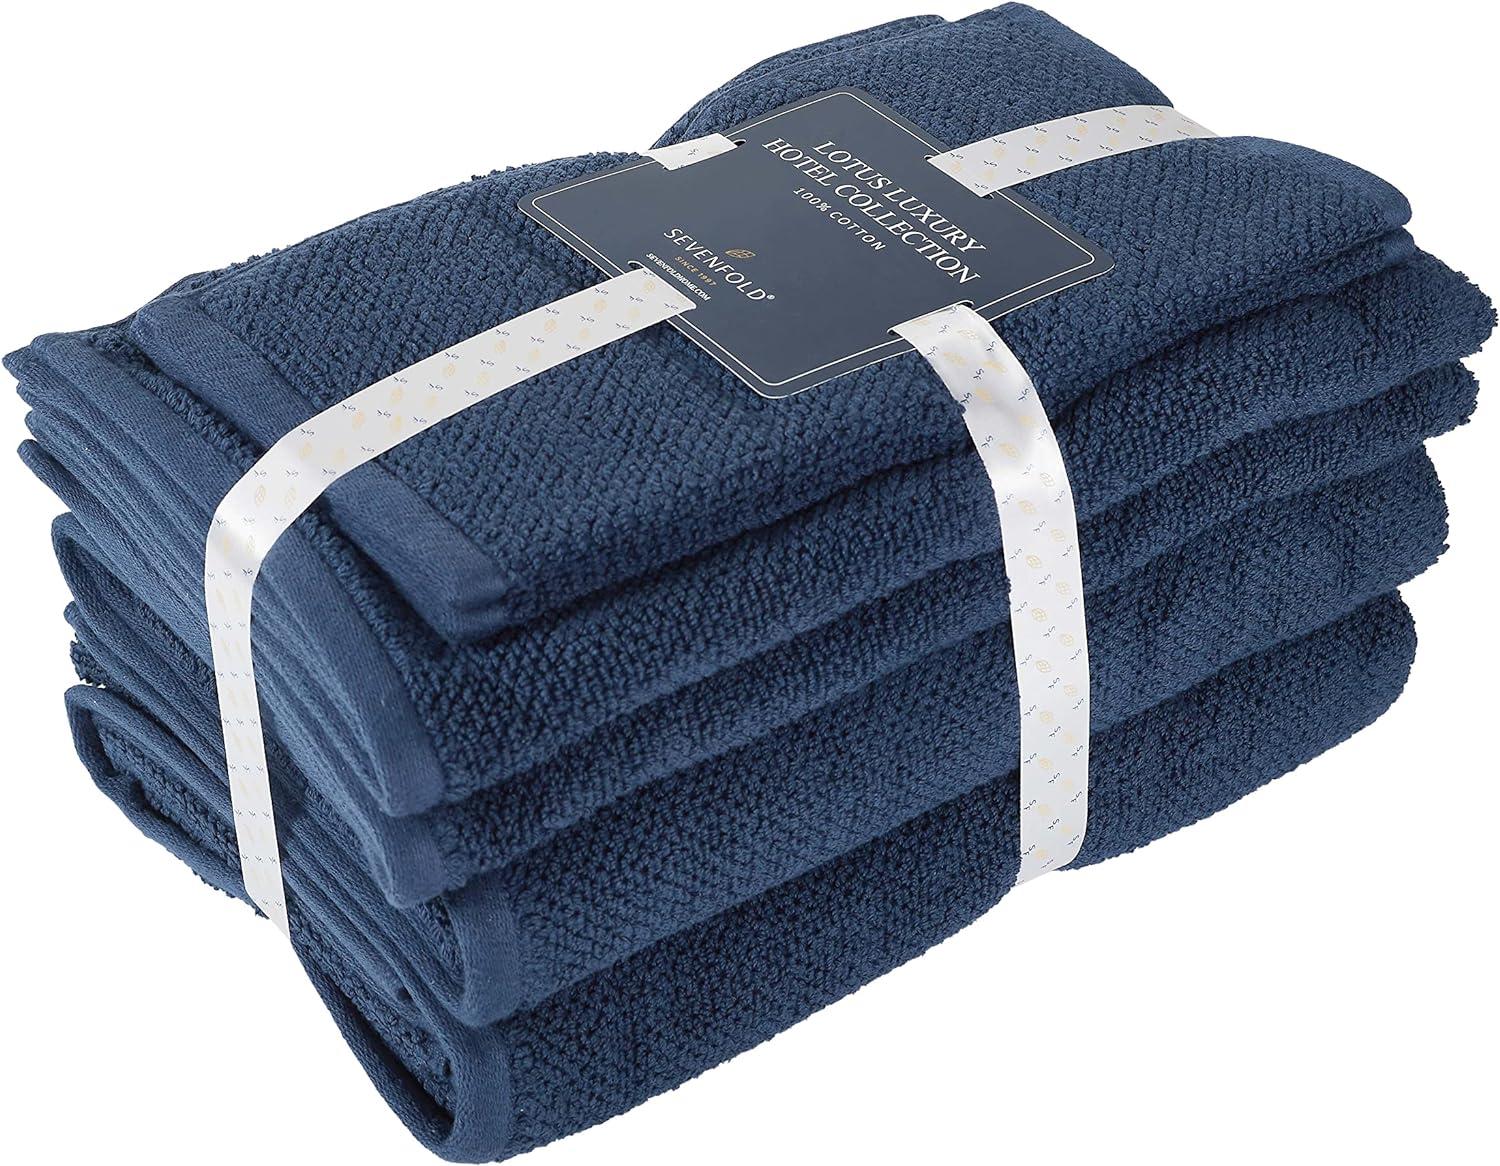 ESSELL 6 Piece Soft & Strong Towel Set 100% Cotton